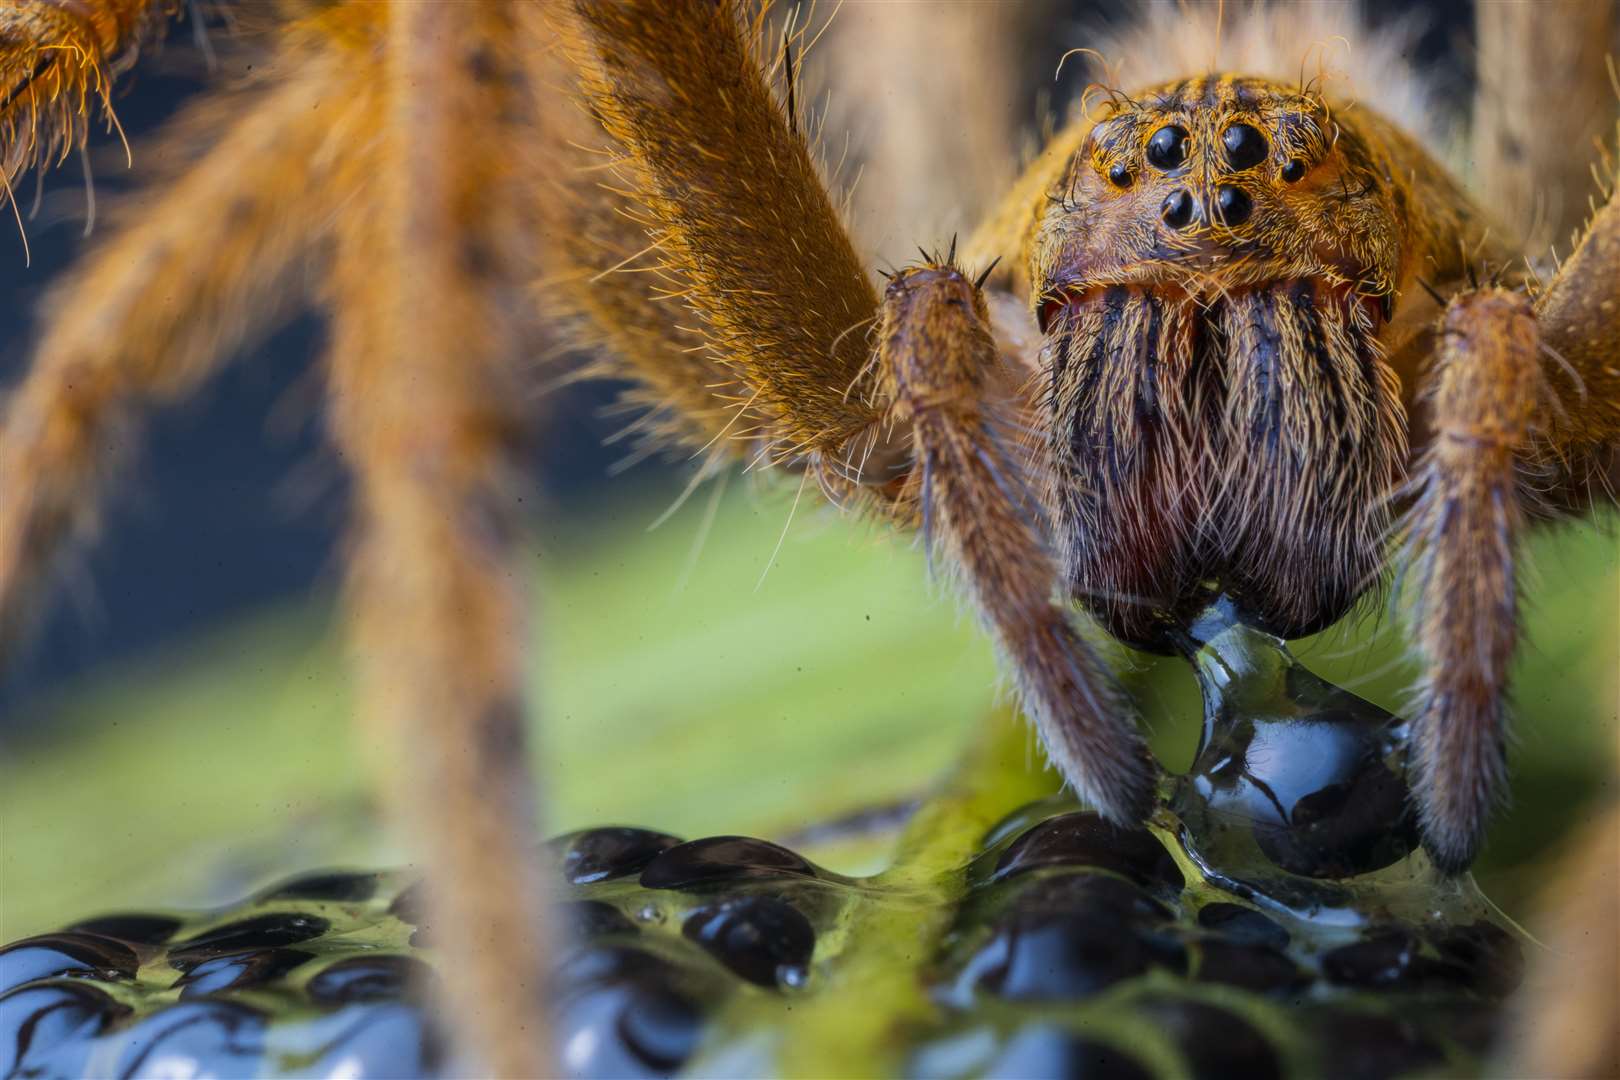 The spider’s supper by Jaime Culebras (Jaime Culebras/Wildlife Photographer of the Year)